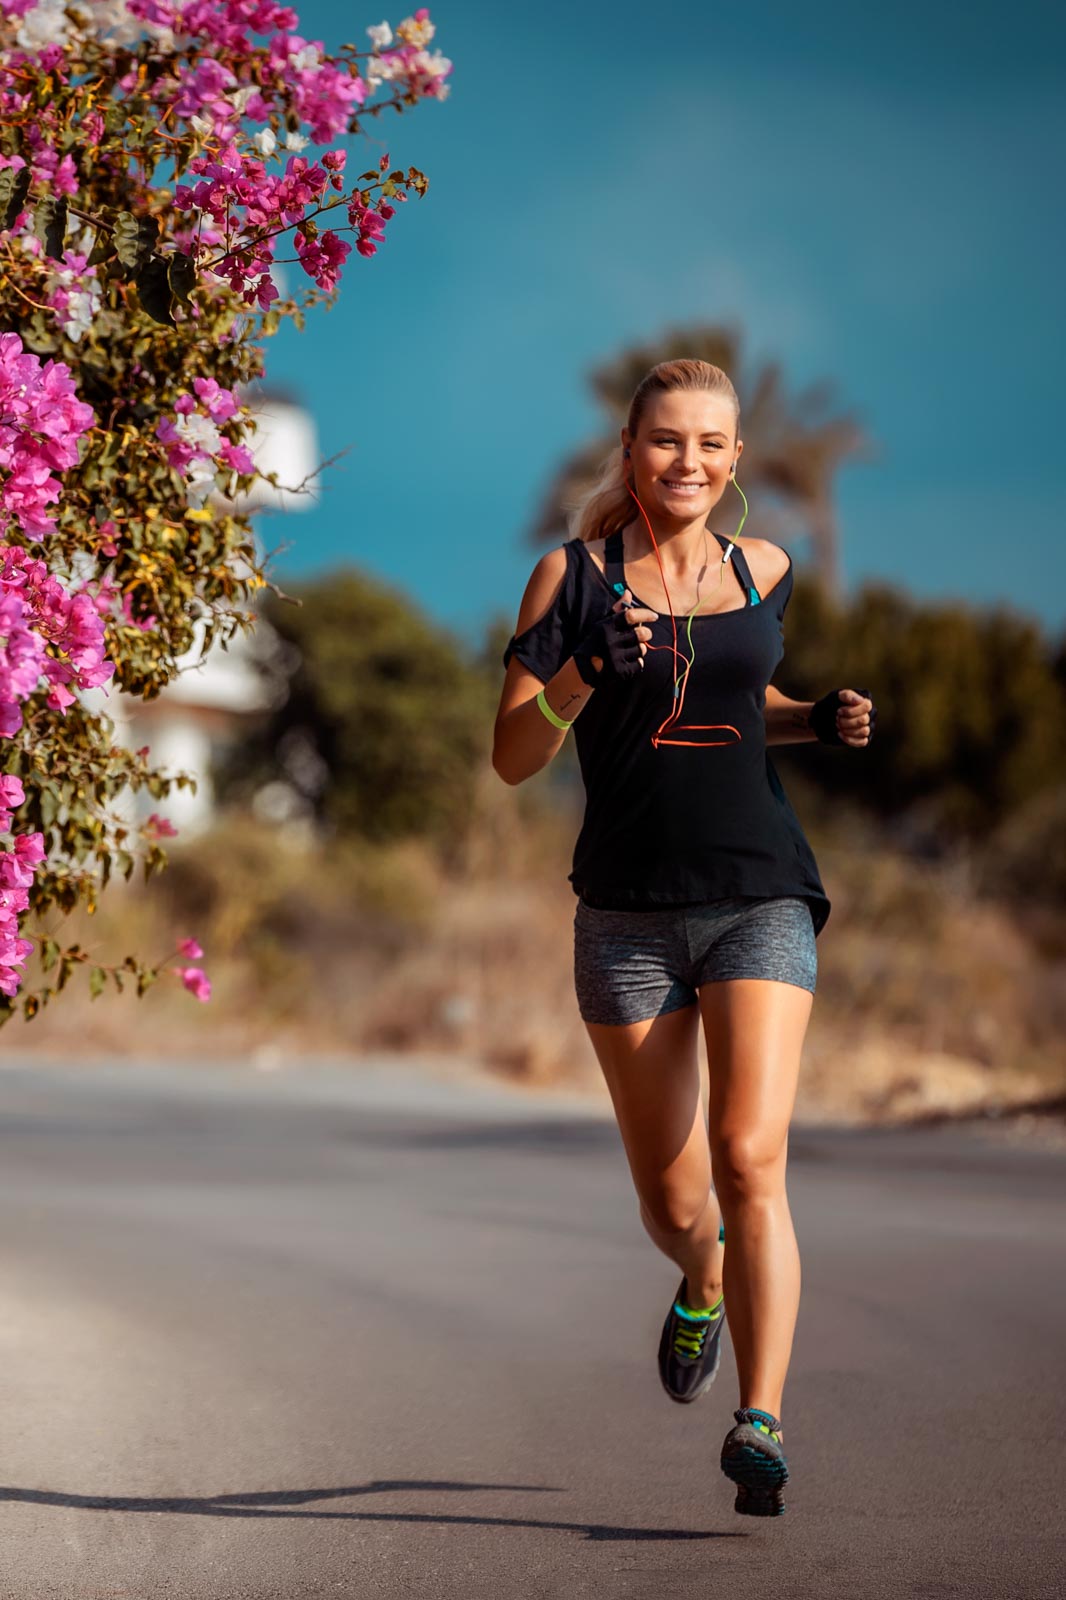 "Running strong in Colton! California Sports and Spine Center treats chronic pain."